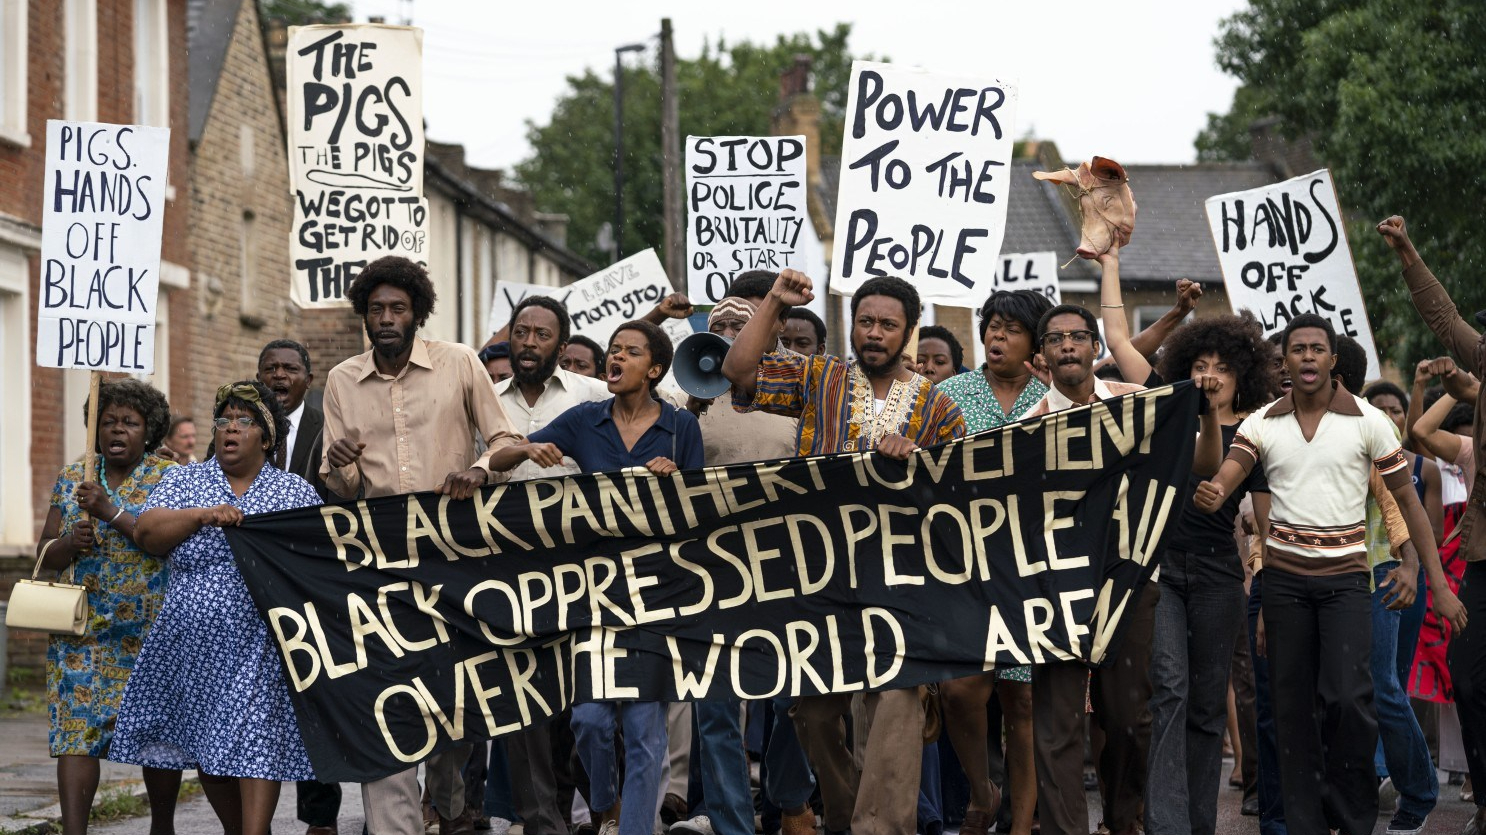 The Mangrove protests march down the street with signs and banners denouncing police brutality as seen in Steve McQueen's Small Axe Anthology. 